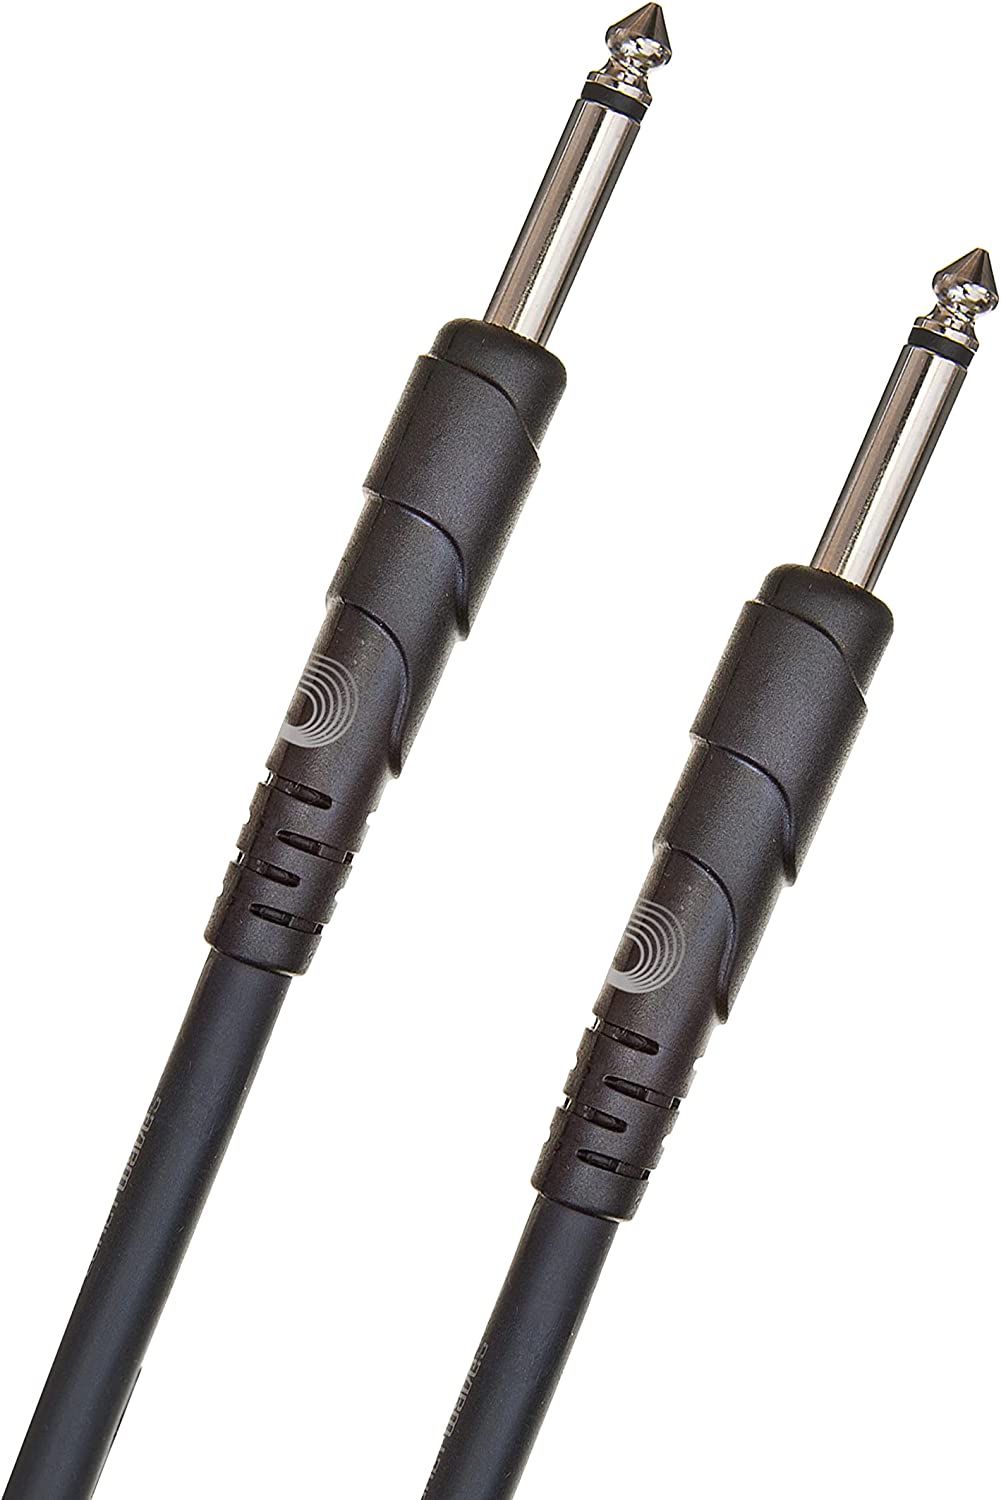 D'Addario Guitar Cable - 1/4 Inch Male to 1/4 Inch [...]